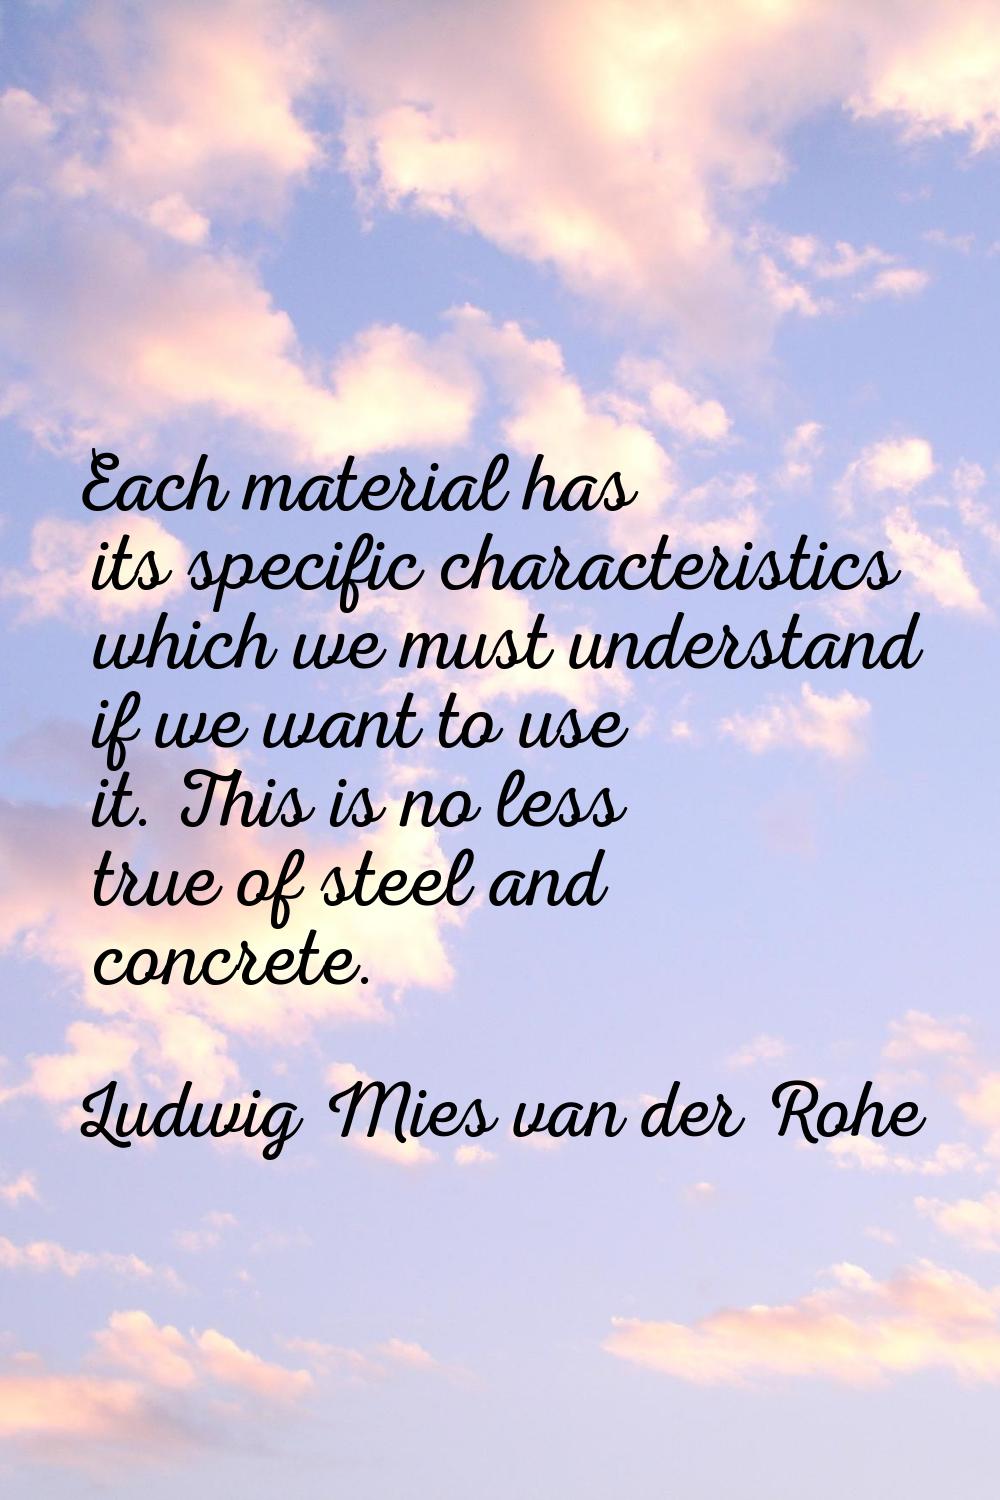 Each material has its specific characteristics which we must understand if we want to use it. This 